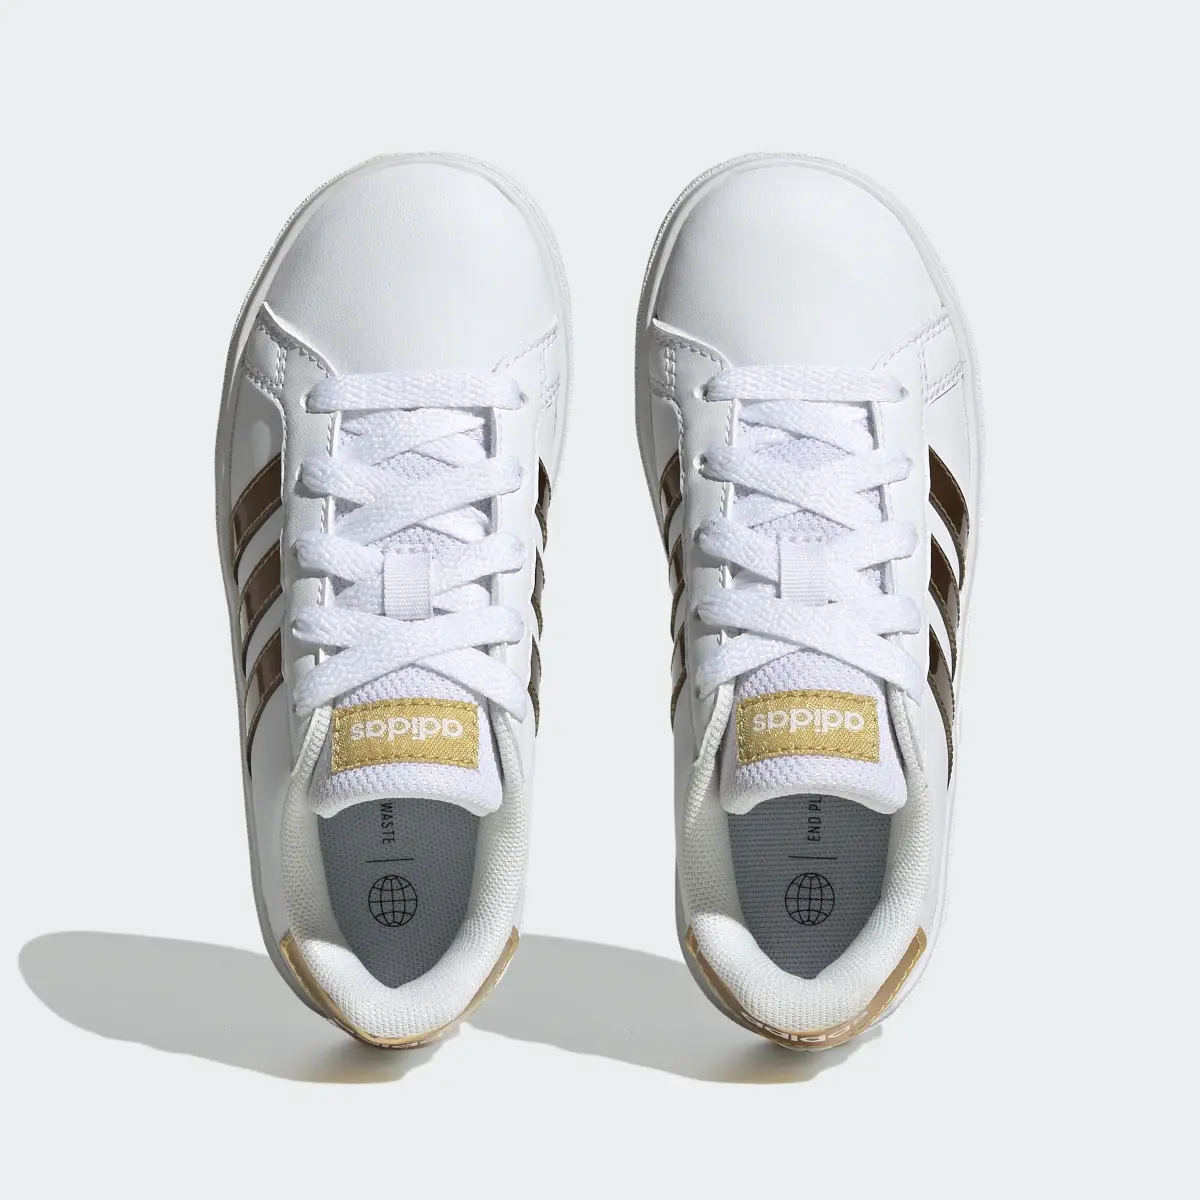 Adidas Grand Court Sustainable Lace Schuh. 3